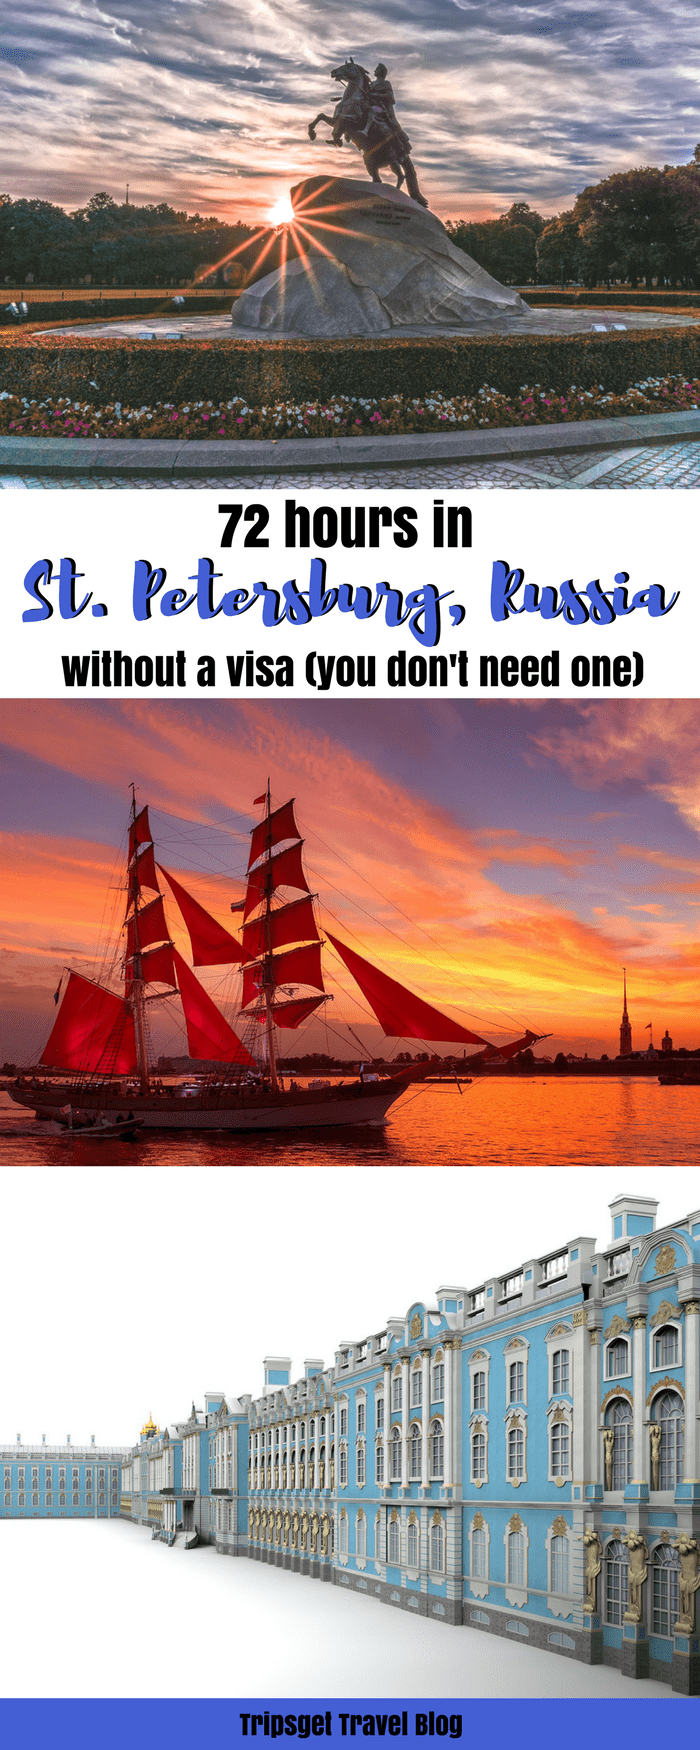 72 hours in Saint Petersburg, Russia without a visa. Visa free Russia. St. Petersburg, Russia itinerary